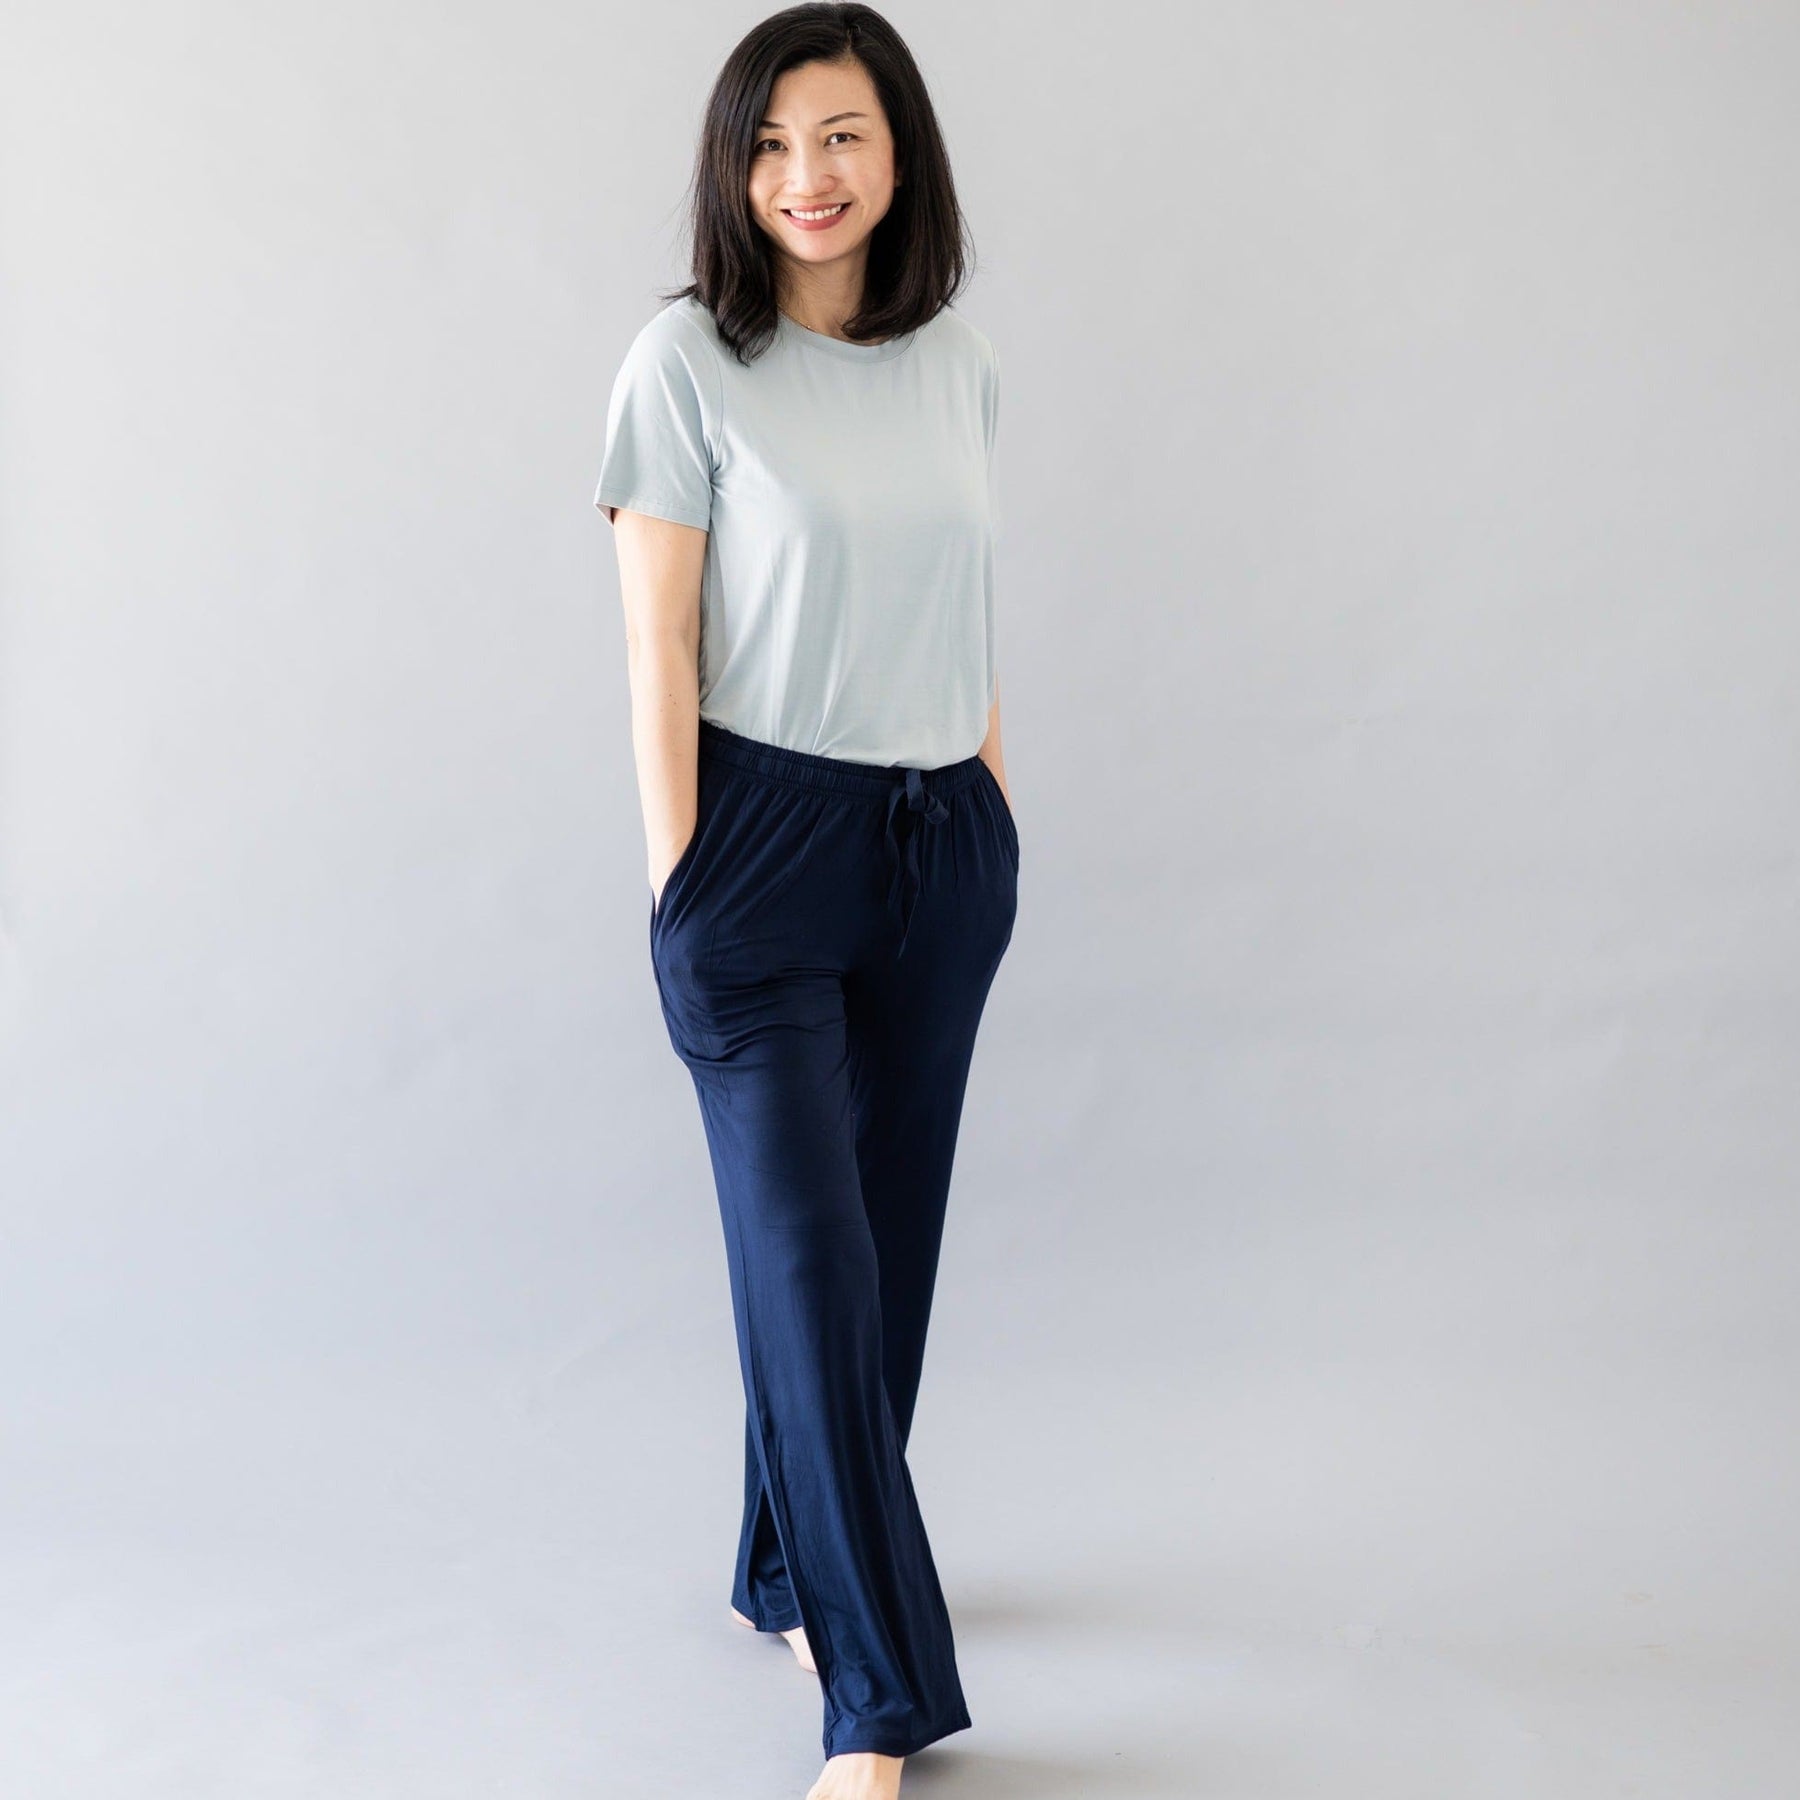 15 Comfy Pants to Wear While Working From Home – Footwear News